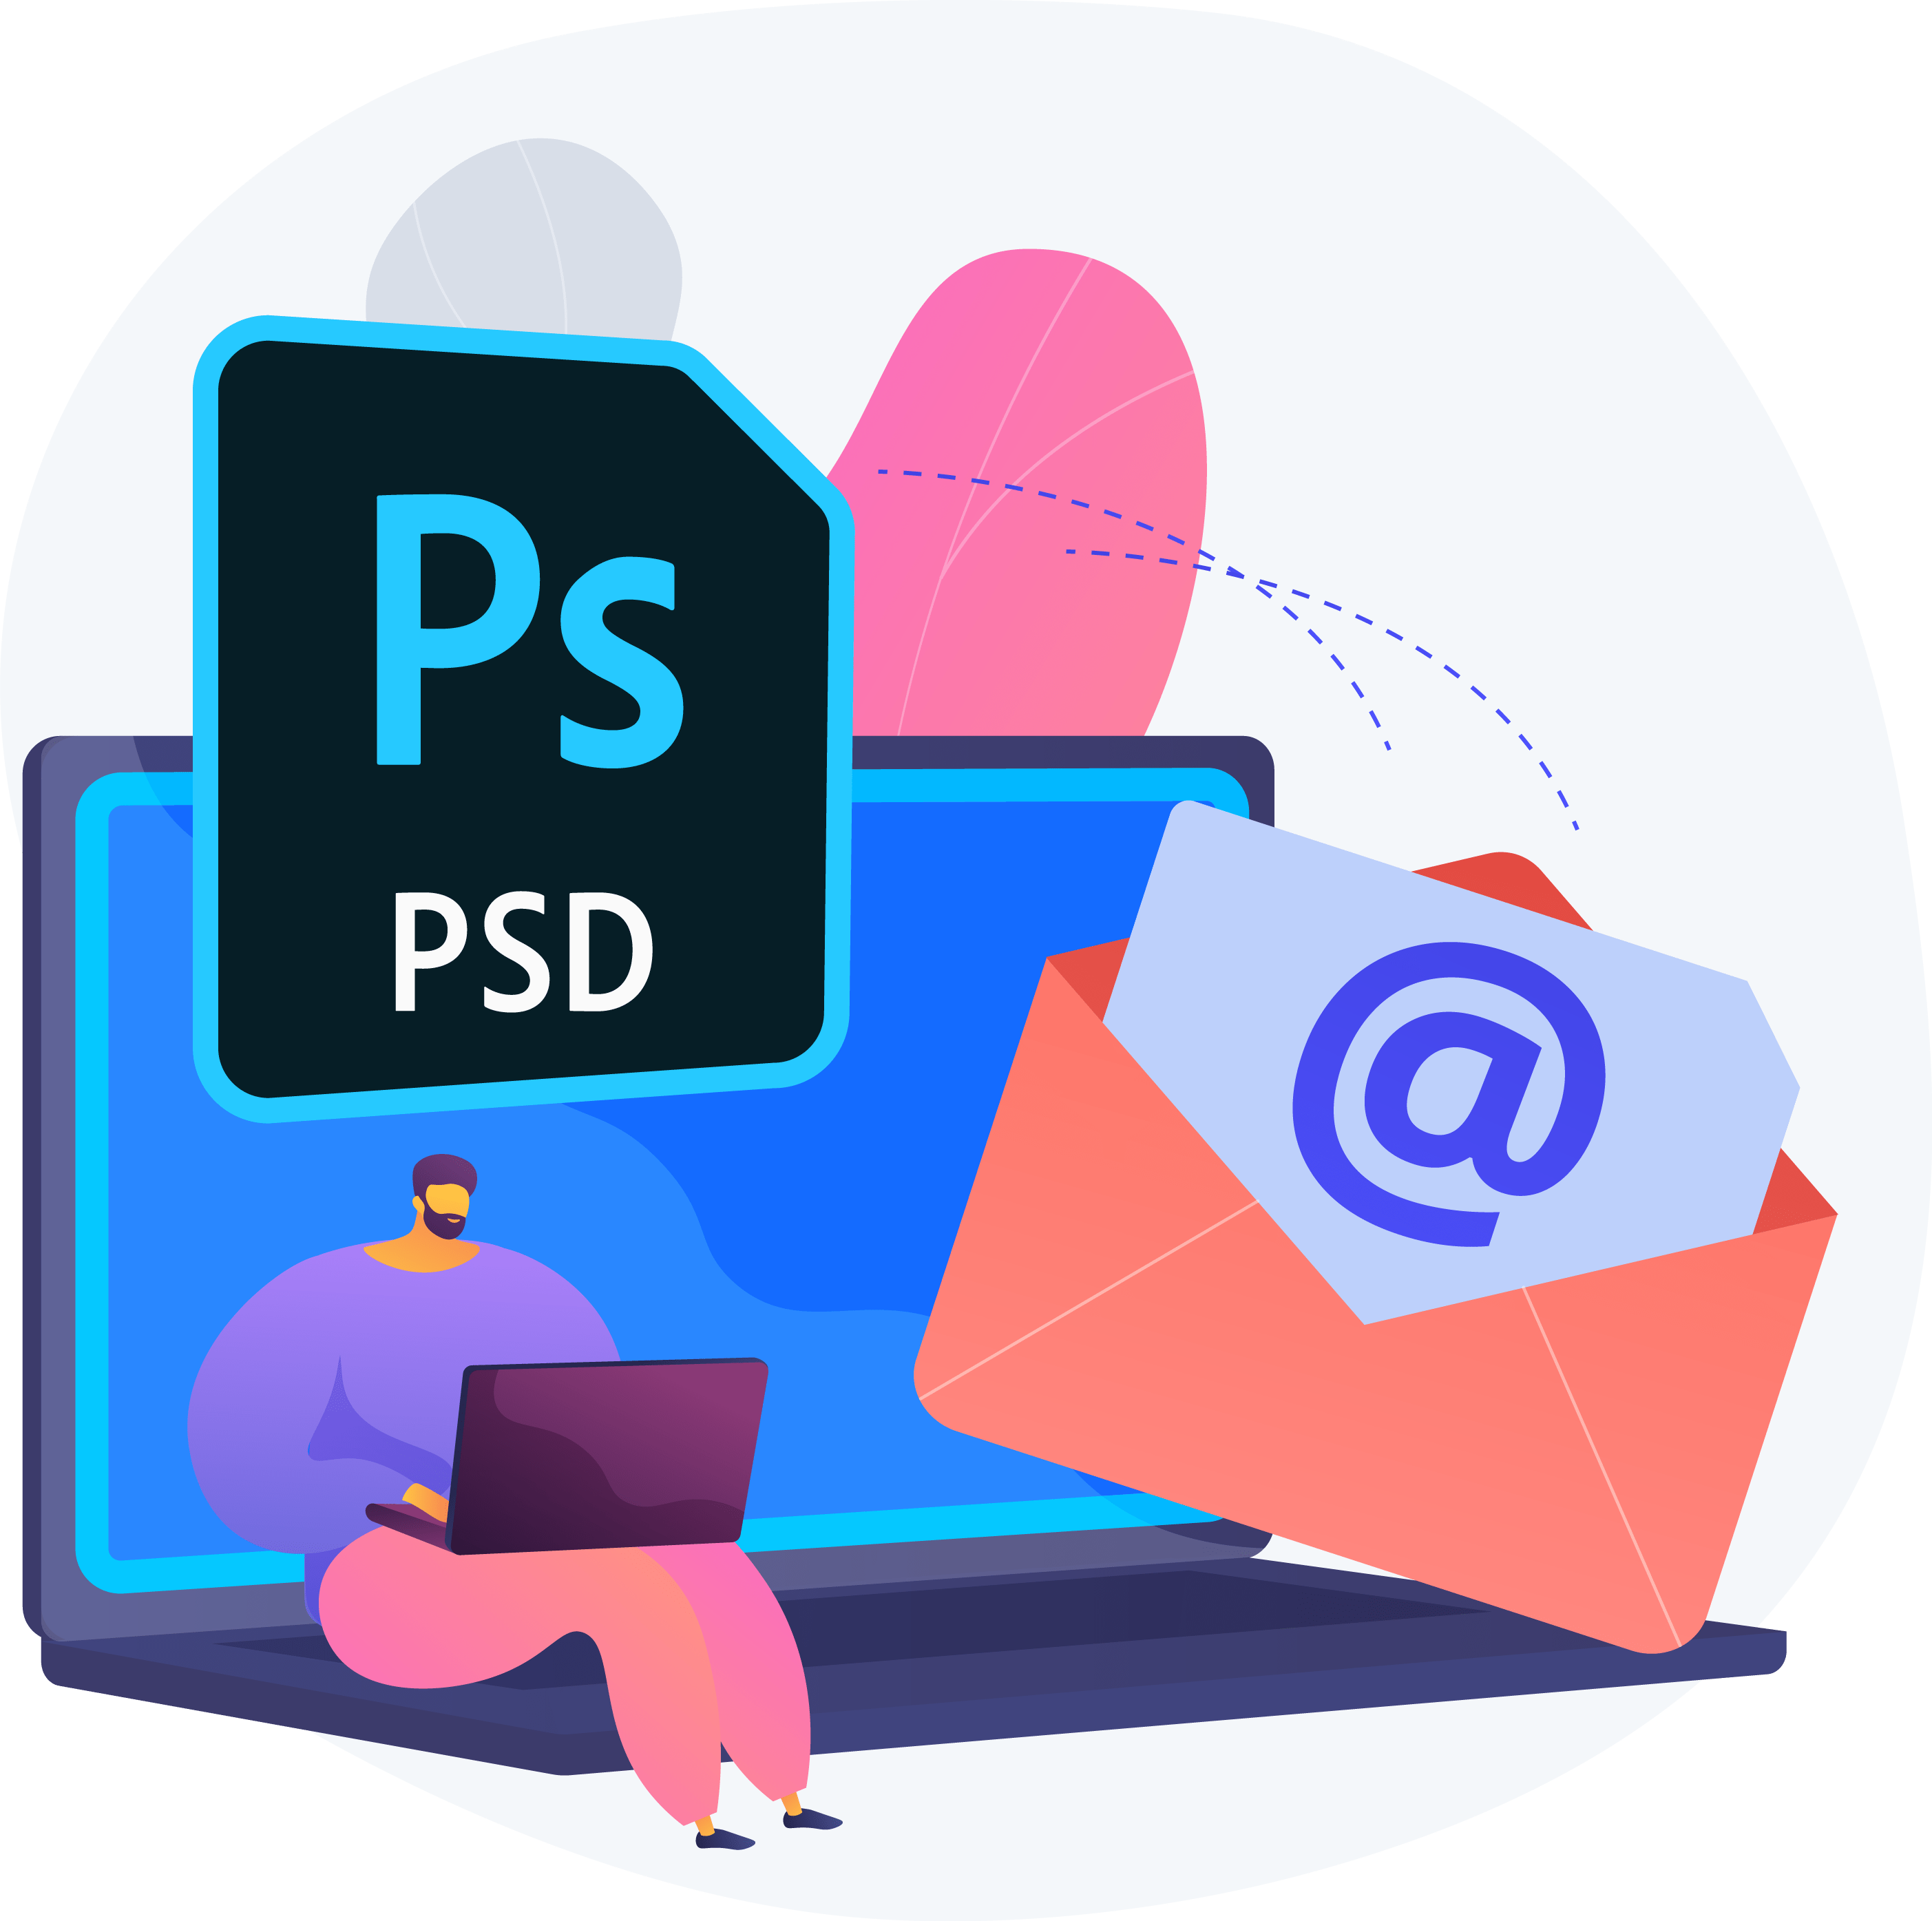 PSD to email Conversion